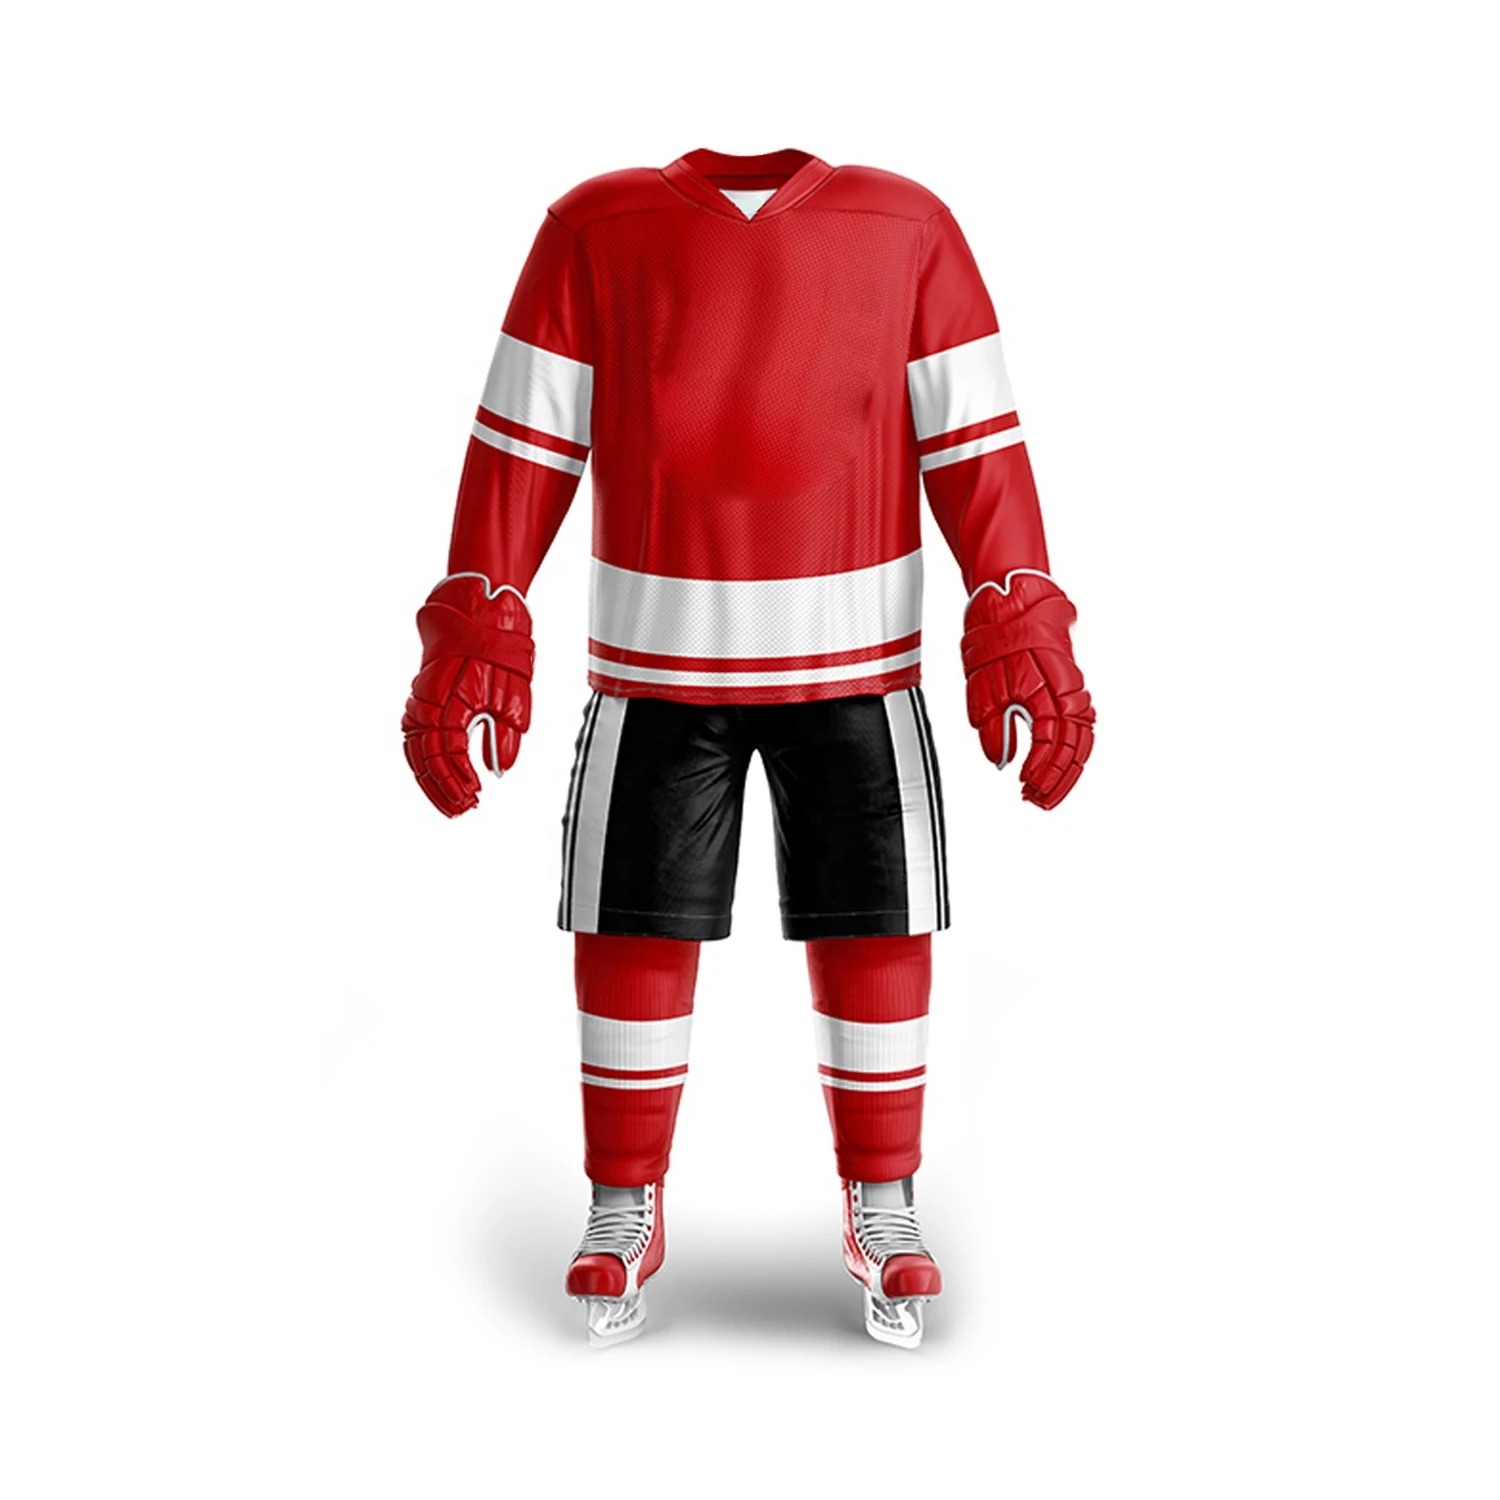 Icepack Red Hockey Jersey – Red and White Shop